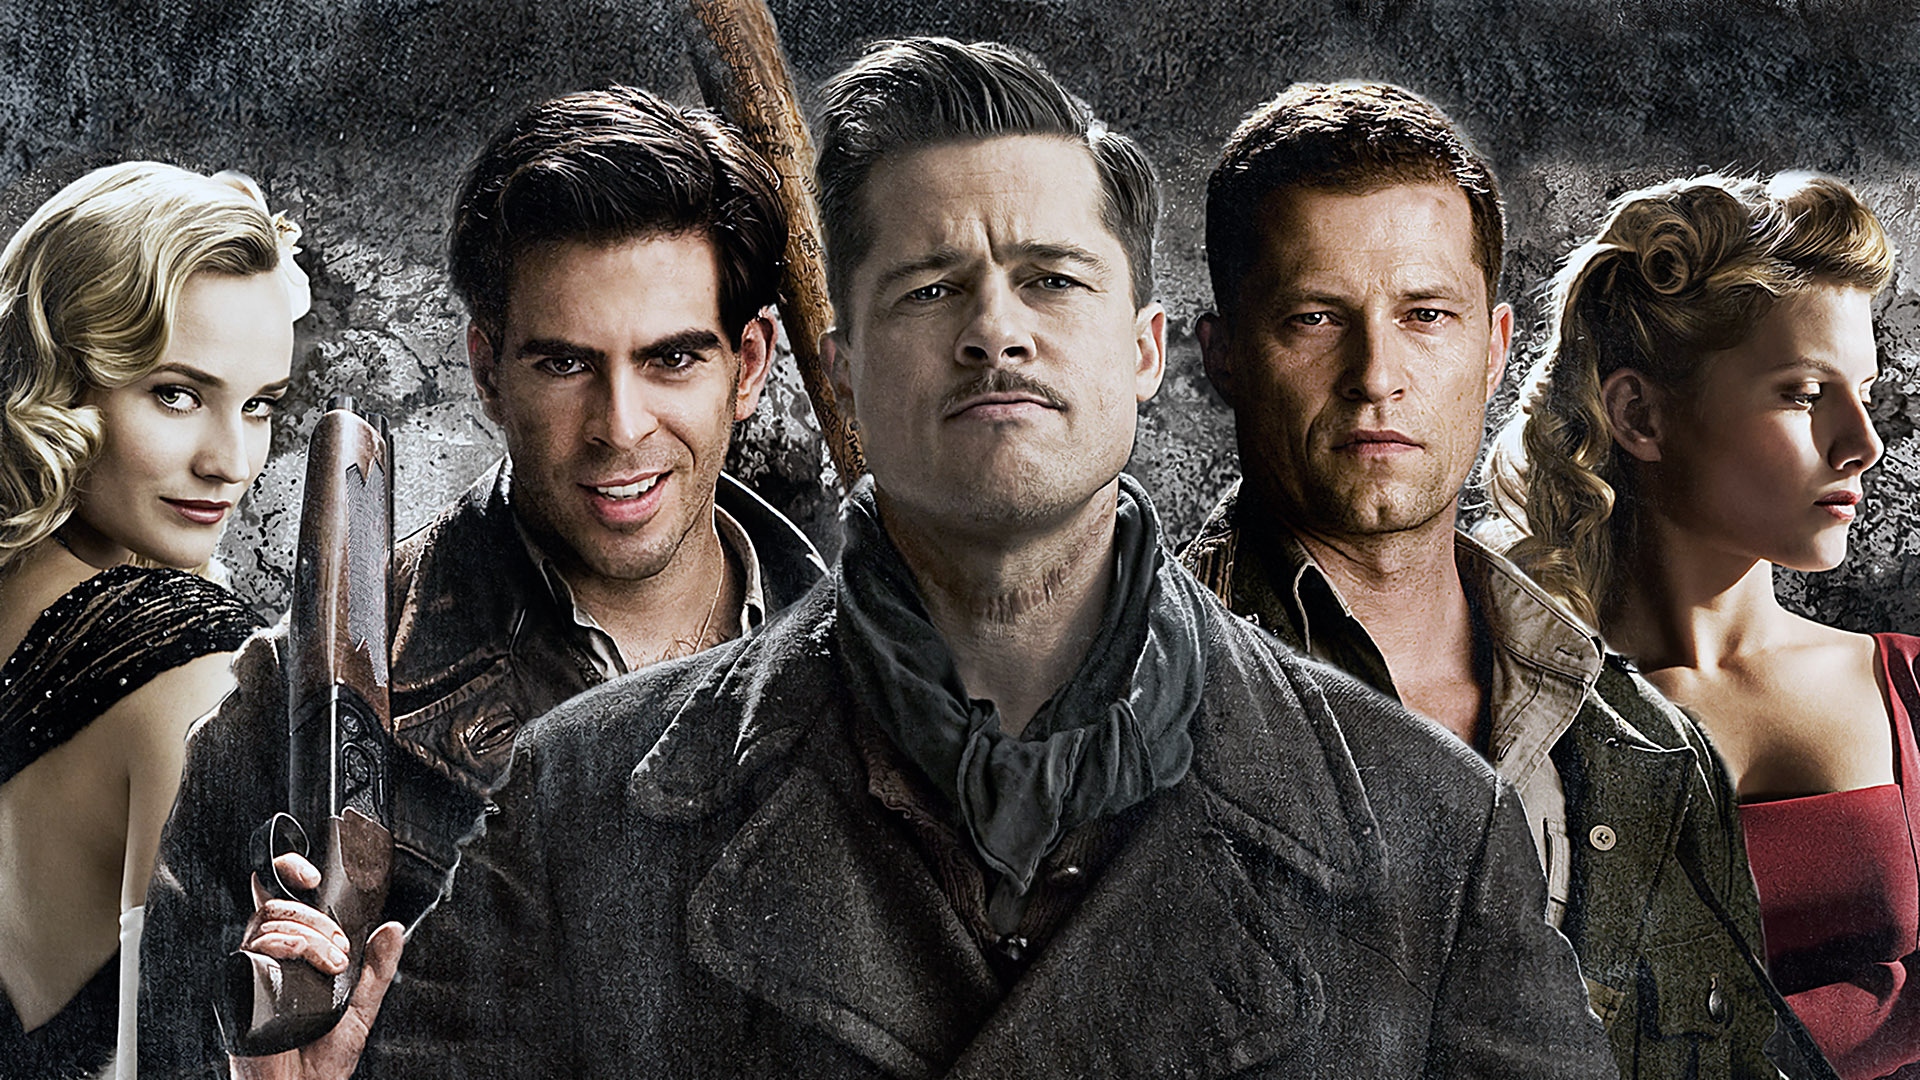 Inglourious Basterds Wallpaper Pictures Image